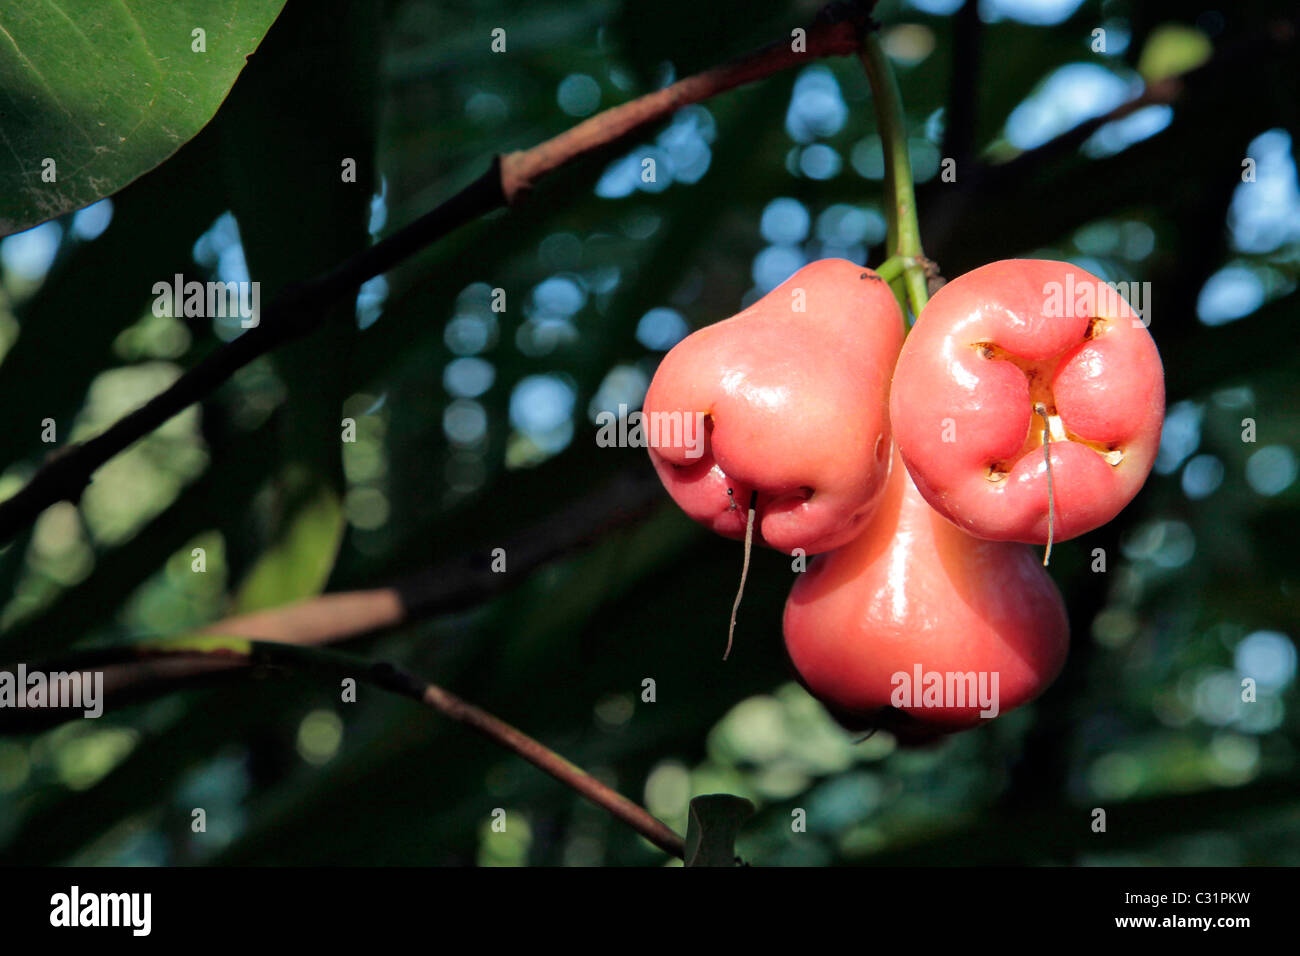 ROSE APPLES OR WATER APPLES, TROPICAL FRUIT GROWING ON THE SYZYGIUM JAMBOS TREE, THAILAND, ASIA Stock Photo